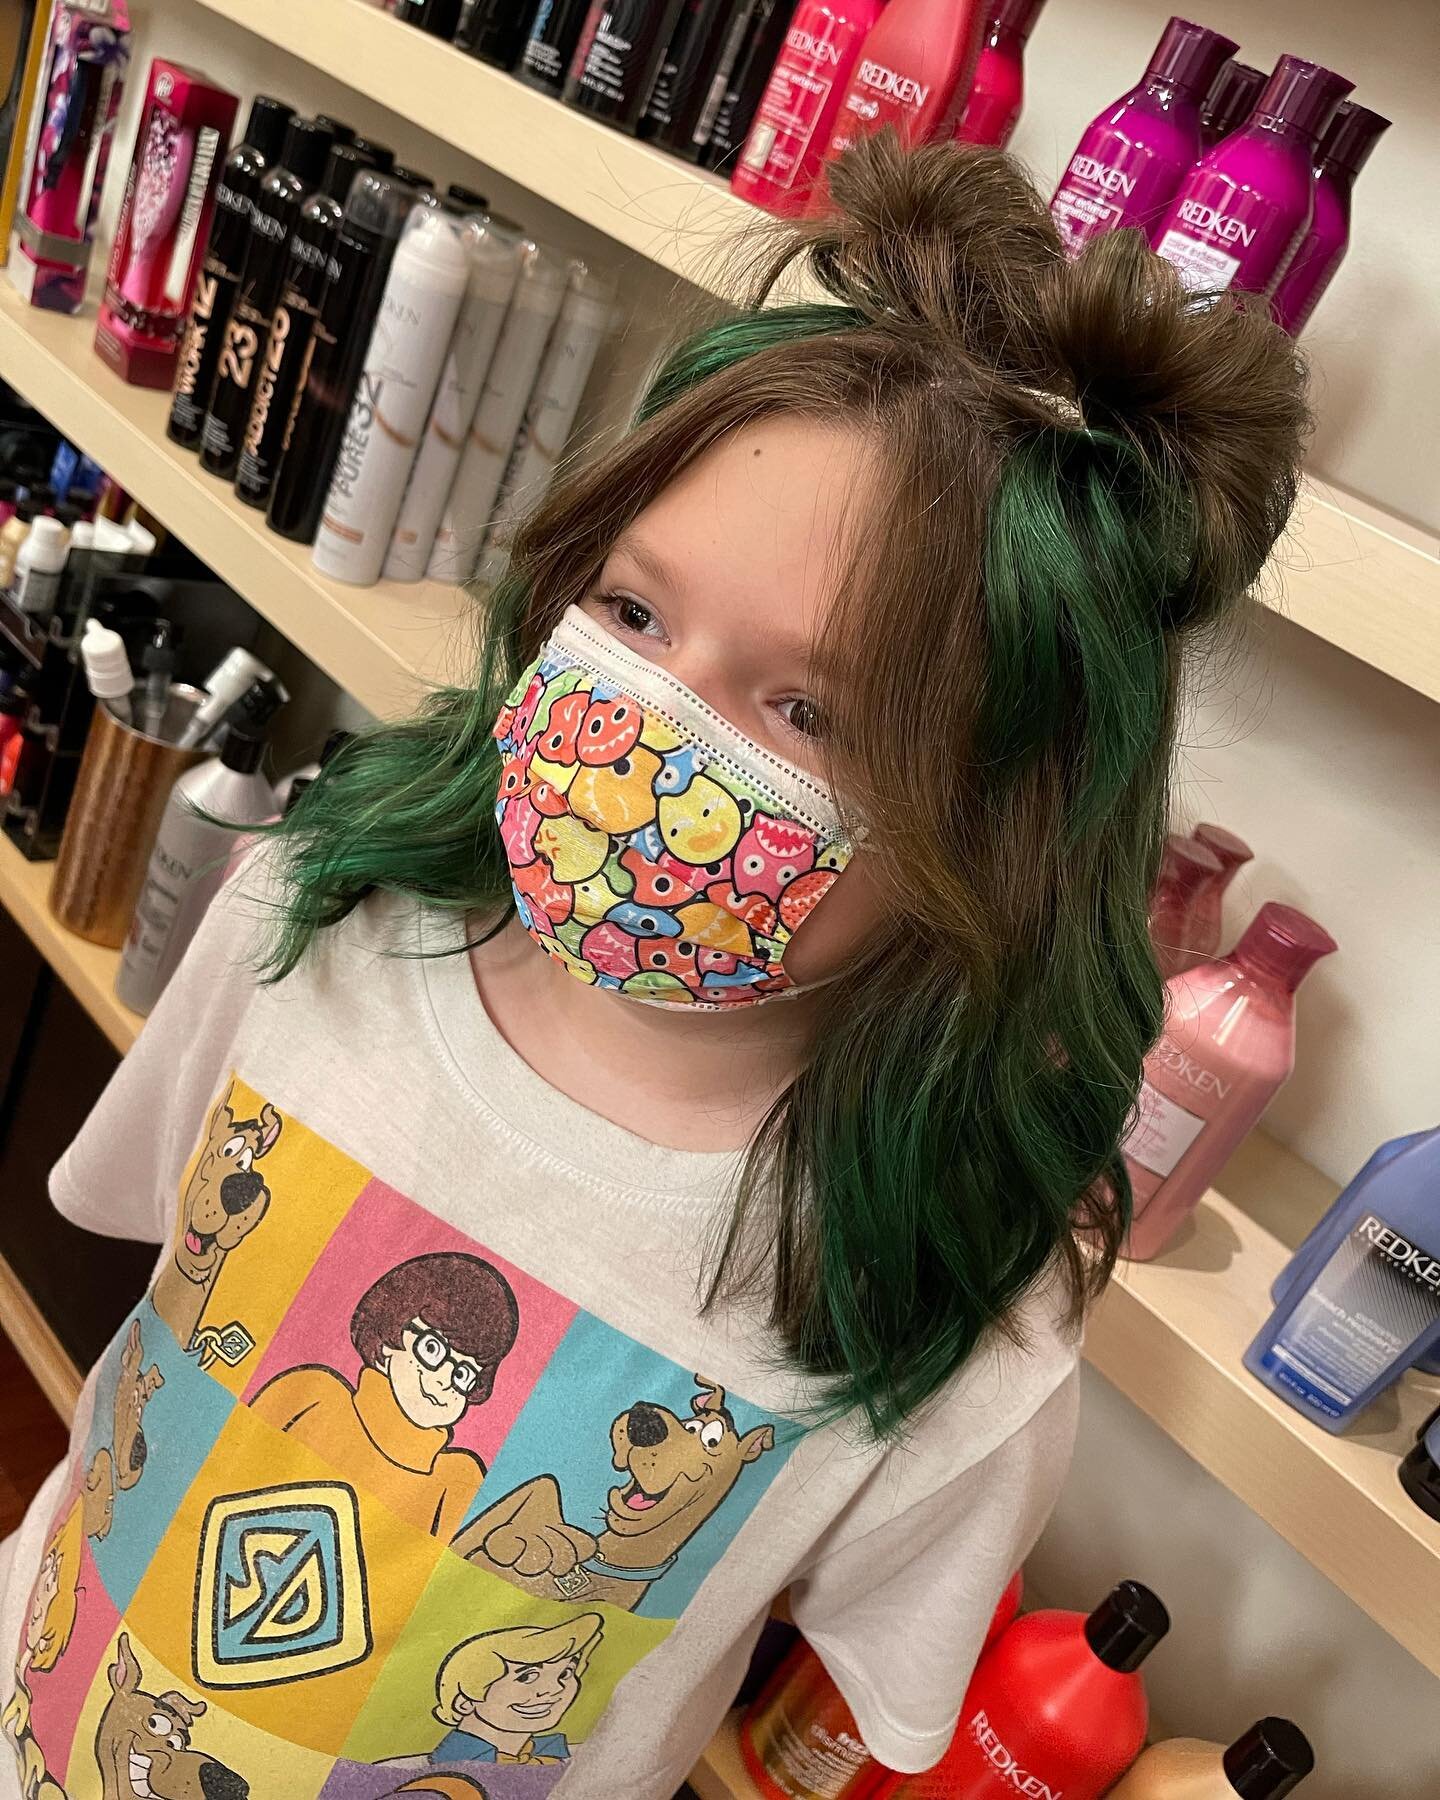 My youngest client, keeping me on my toes always! Space buns 👽 , Curtain Bangs 💥 &amp;&amp; Green Balayage ☘️ stylist : @hairbyhaleya